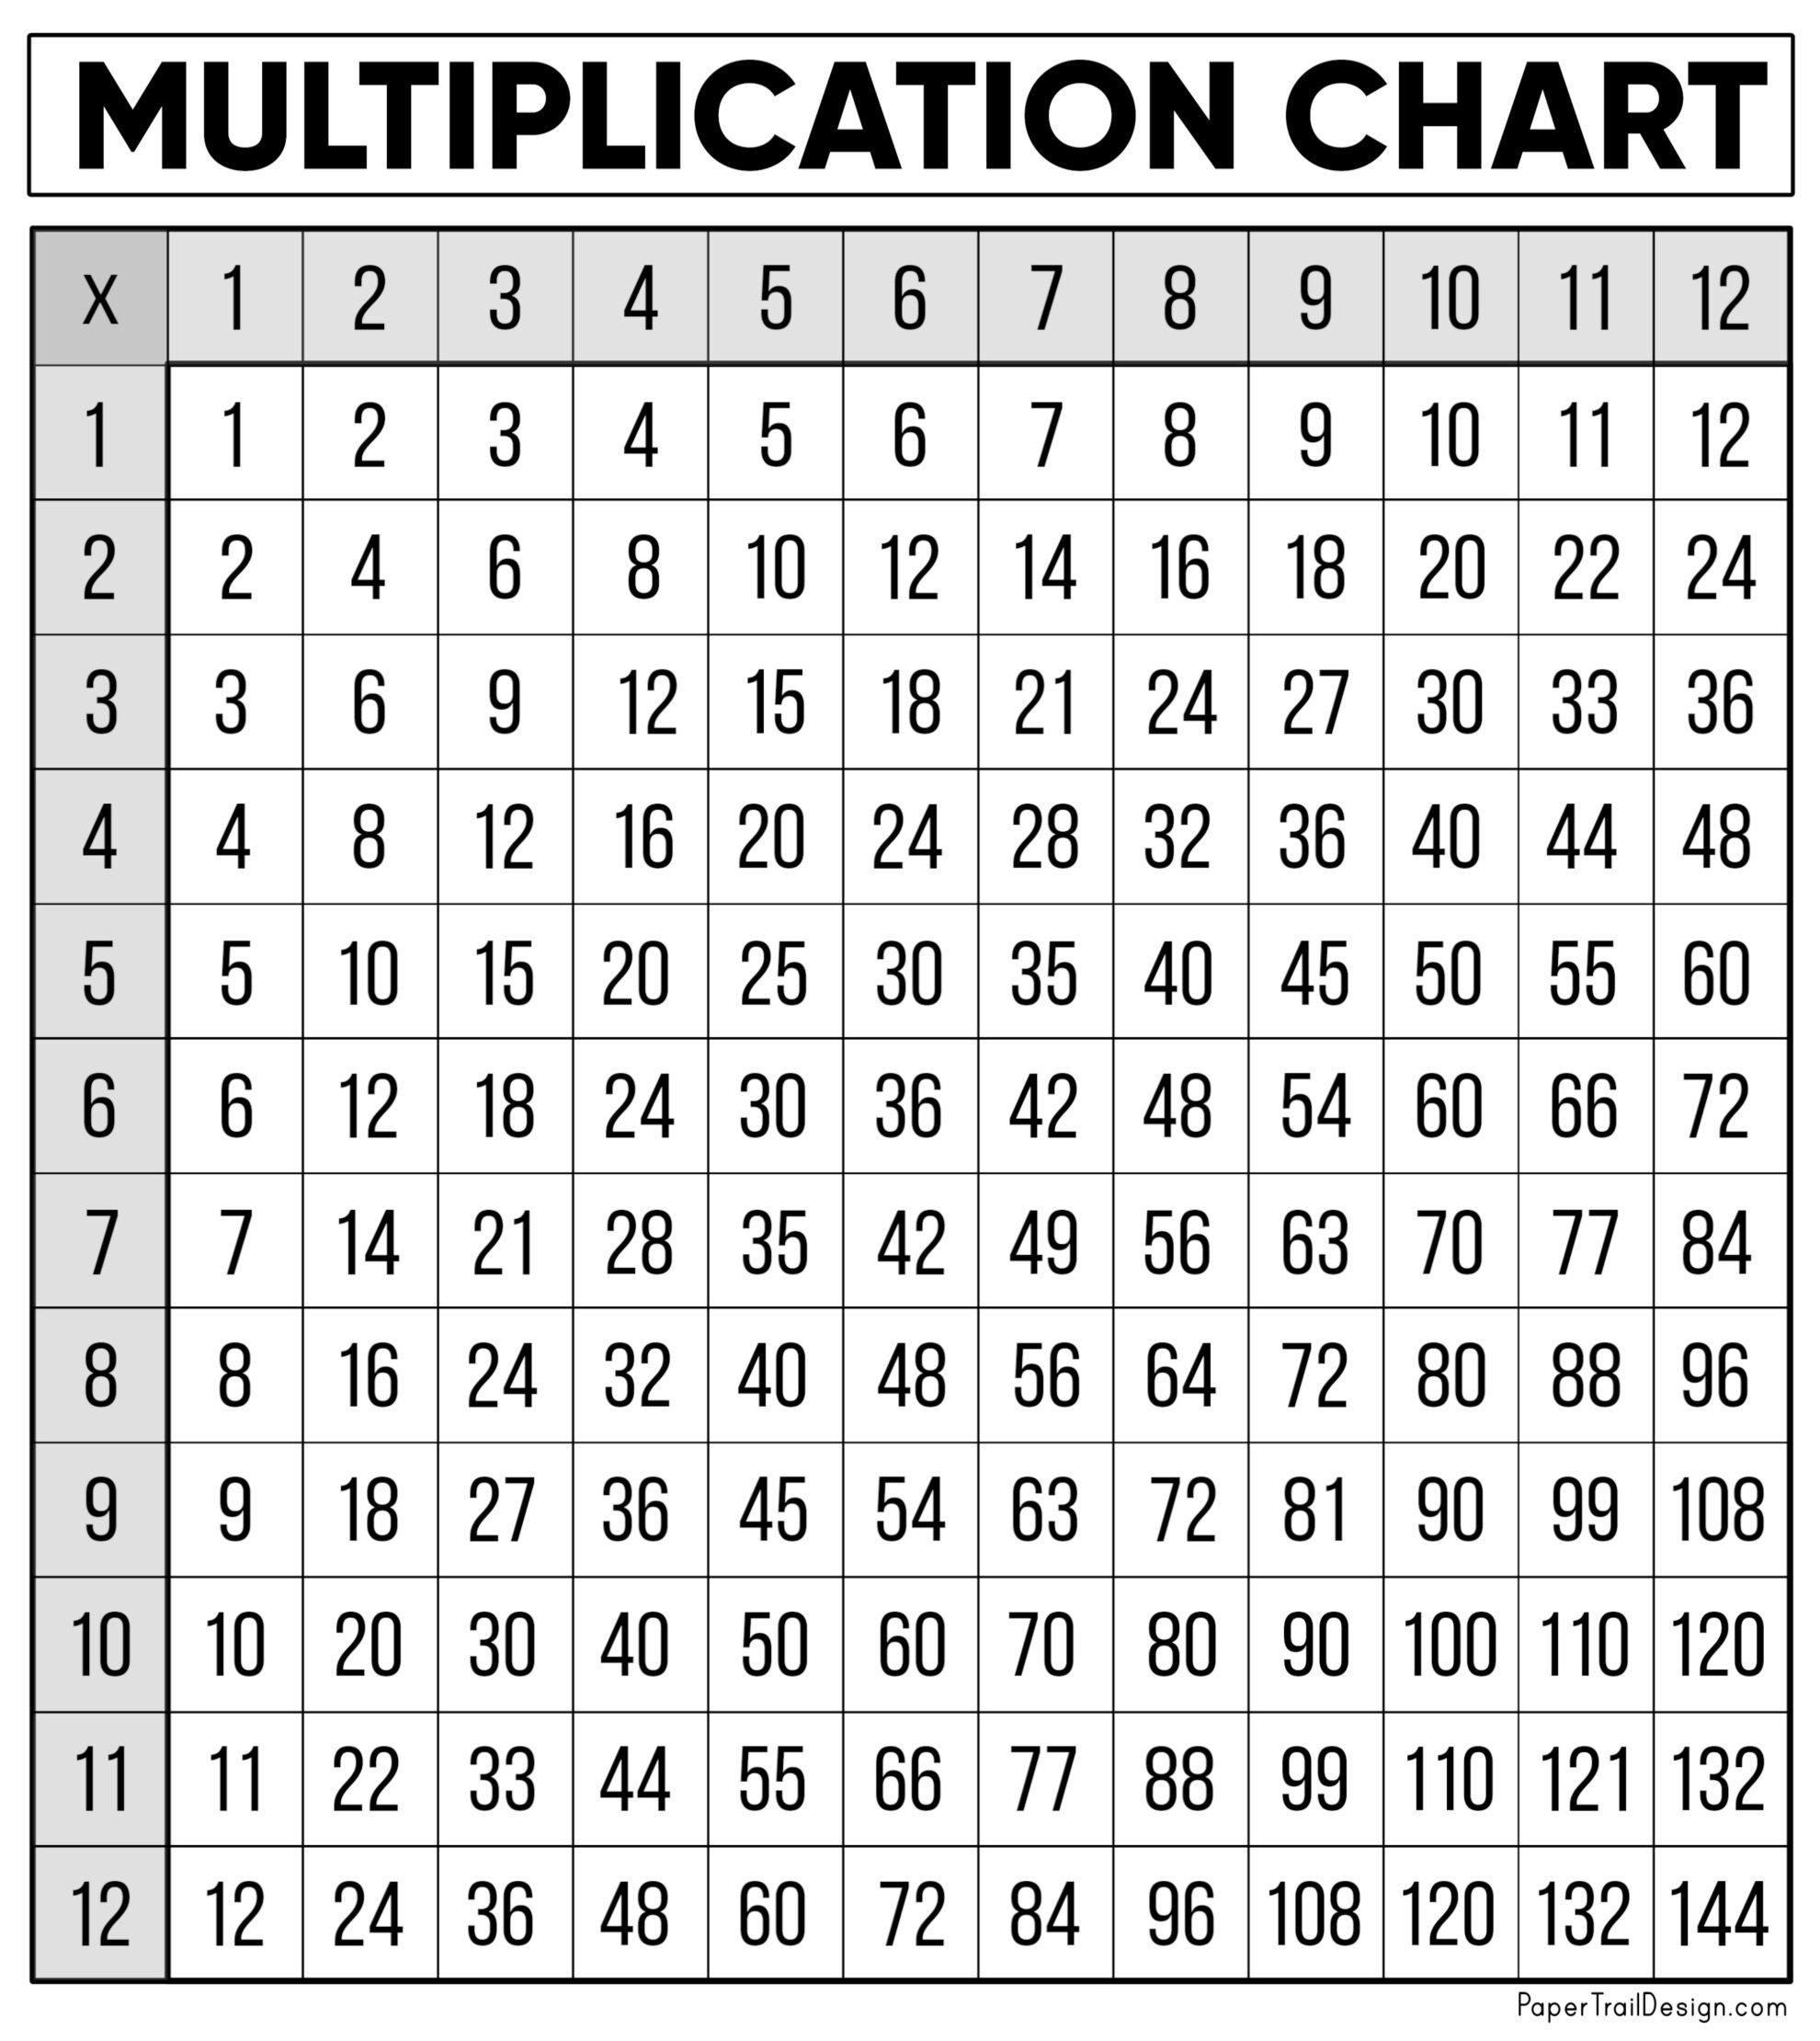 Multiplication Table for Print